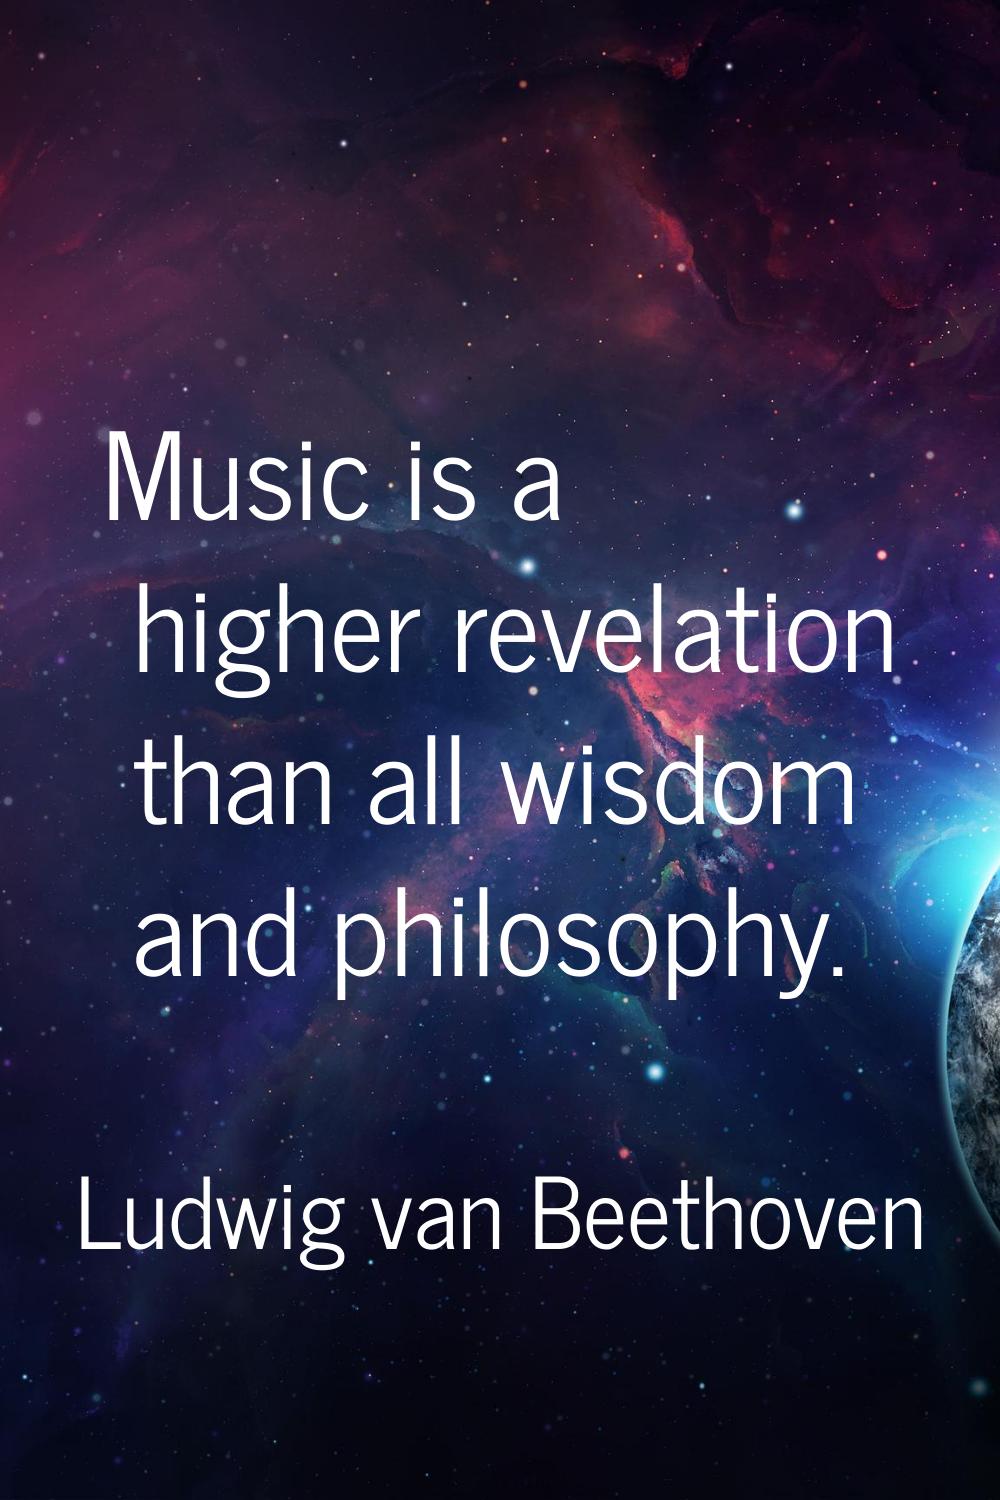 Music is a higher revelation than all wisdom and philosophy.